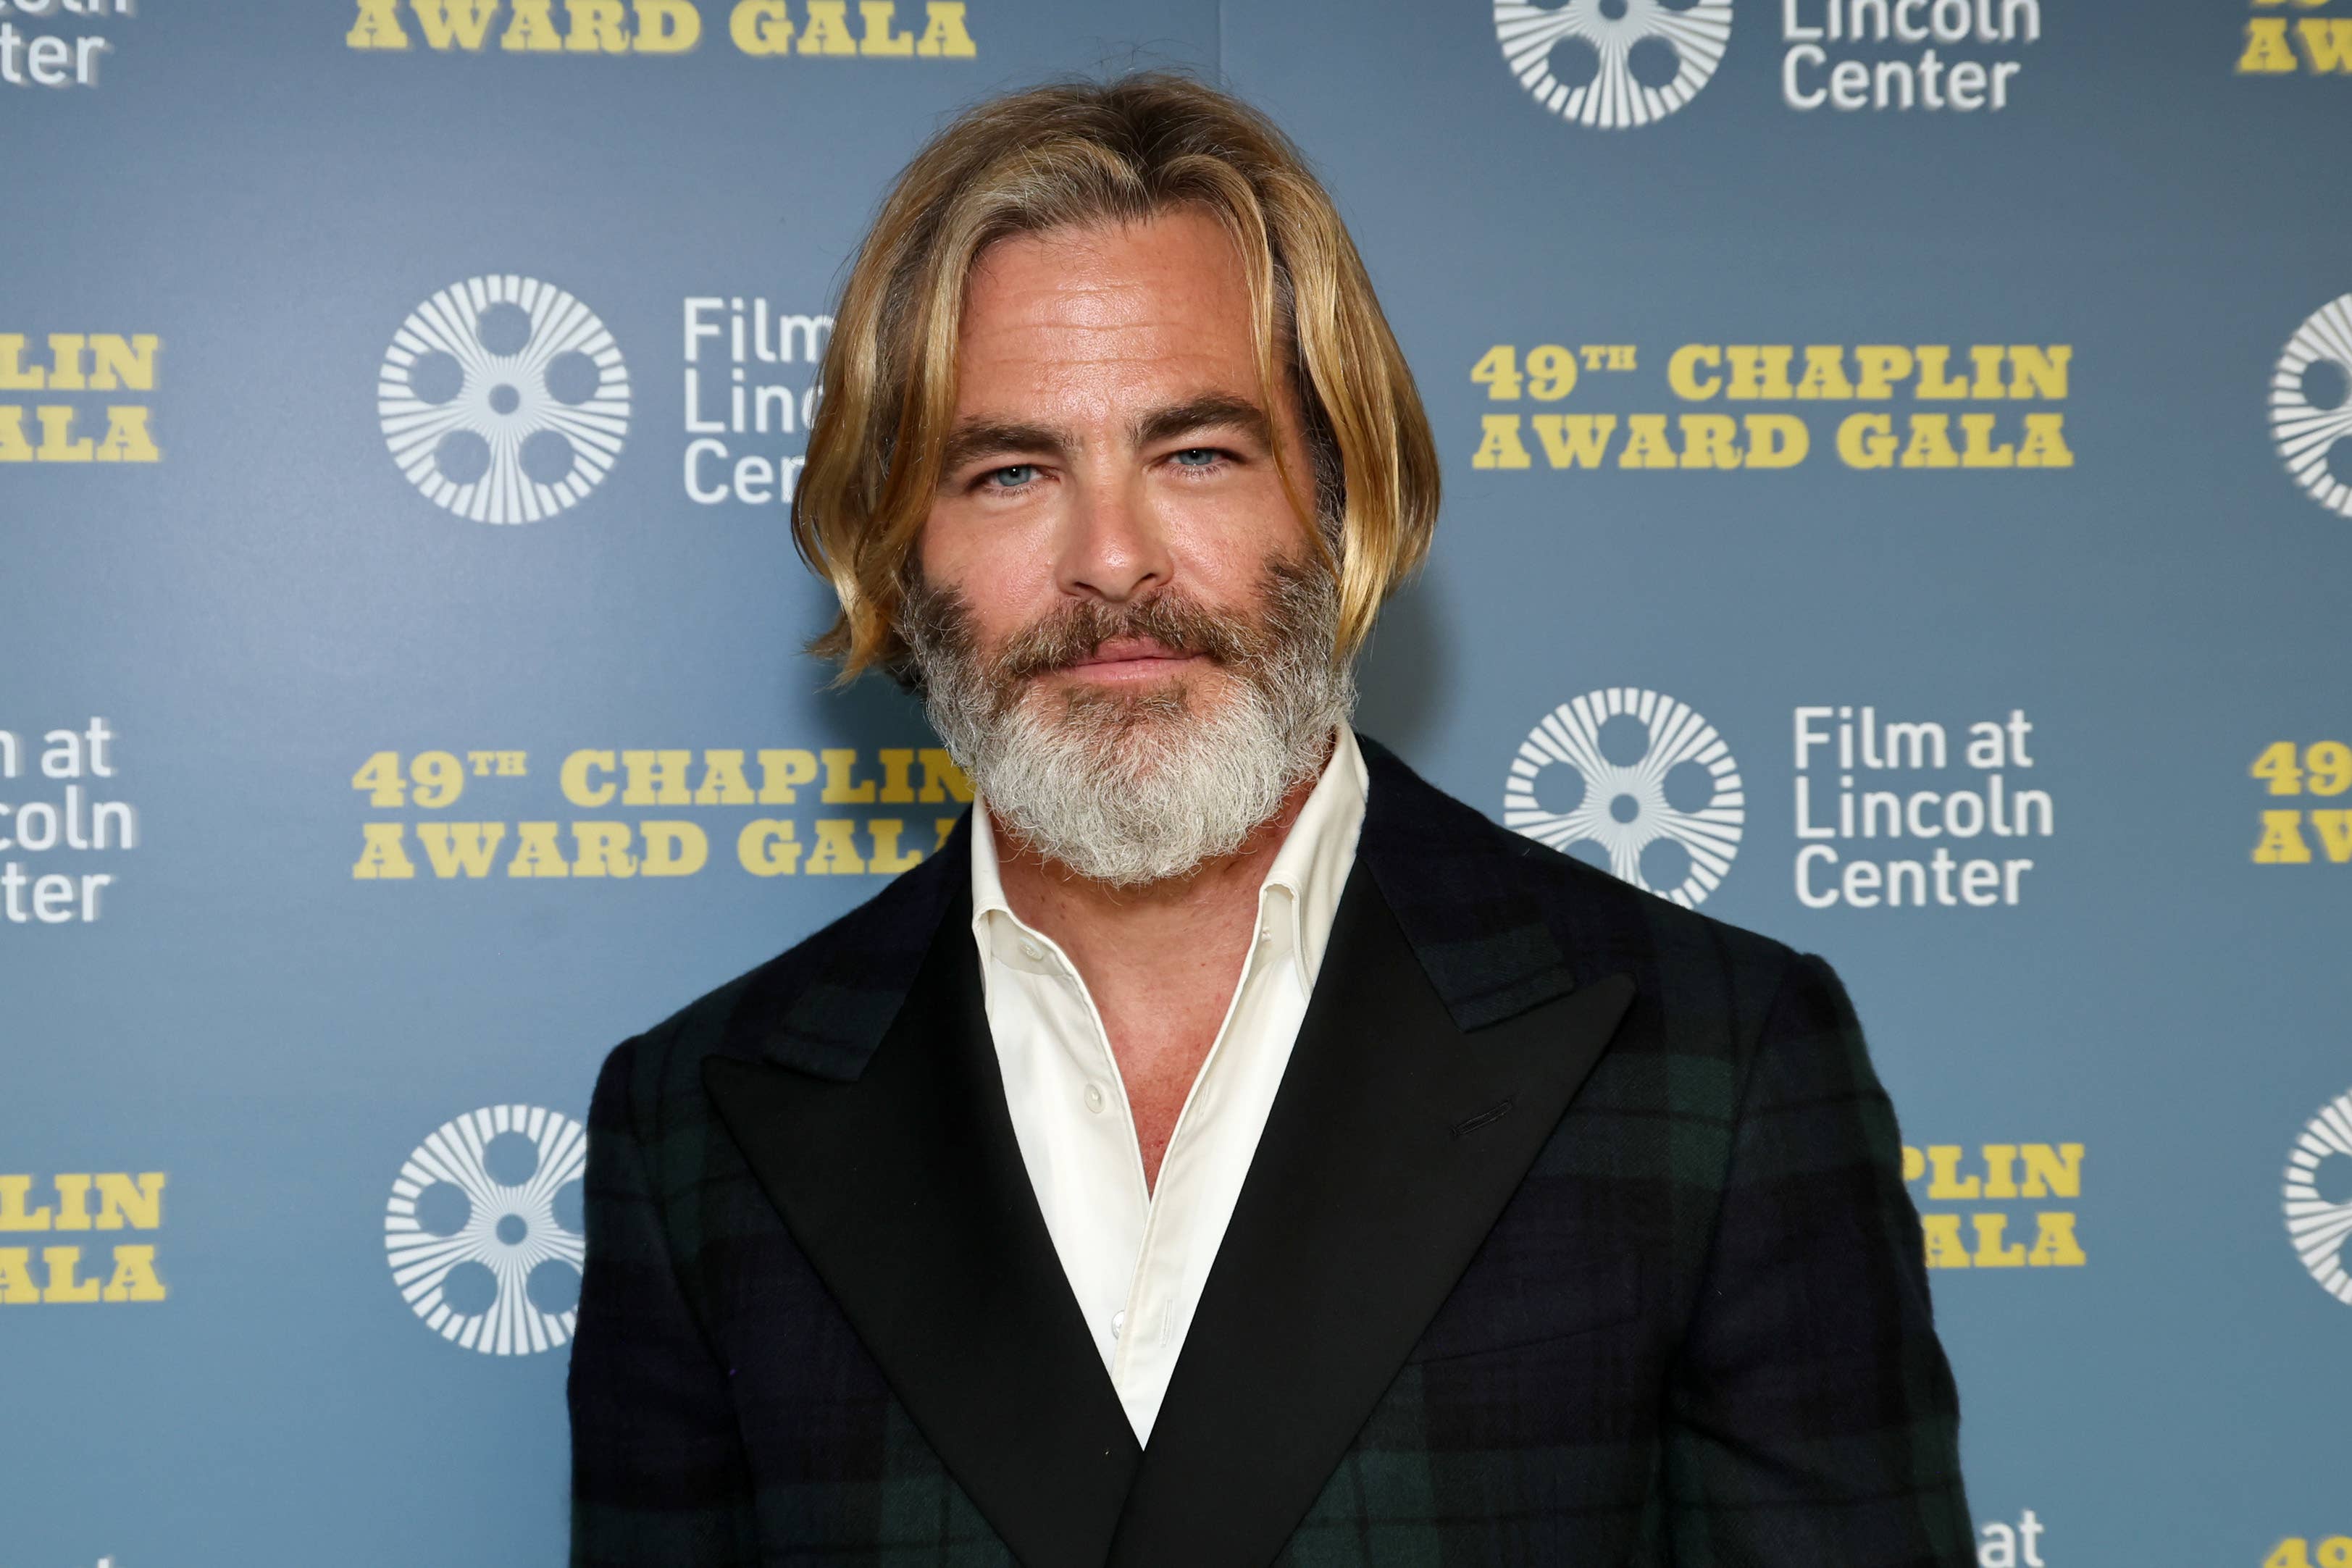 Chris Pine at an event wearing a checkered jacket and black lapel